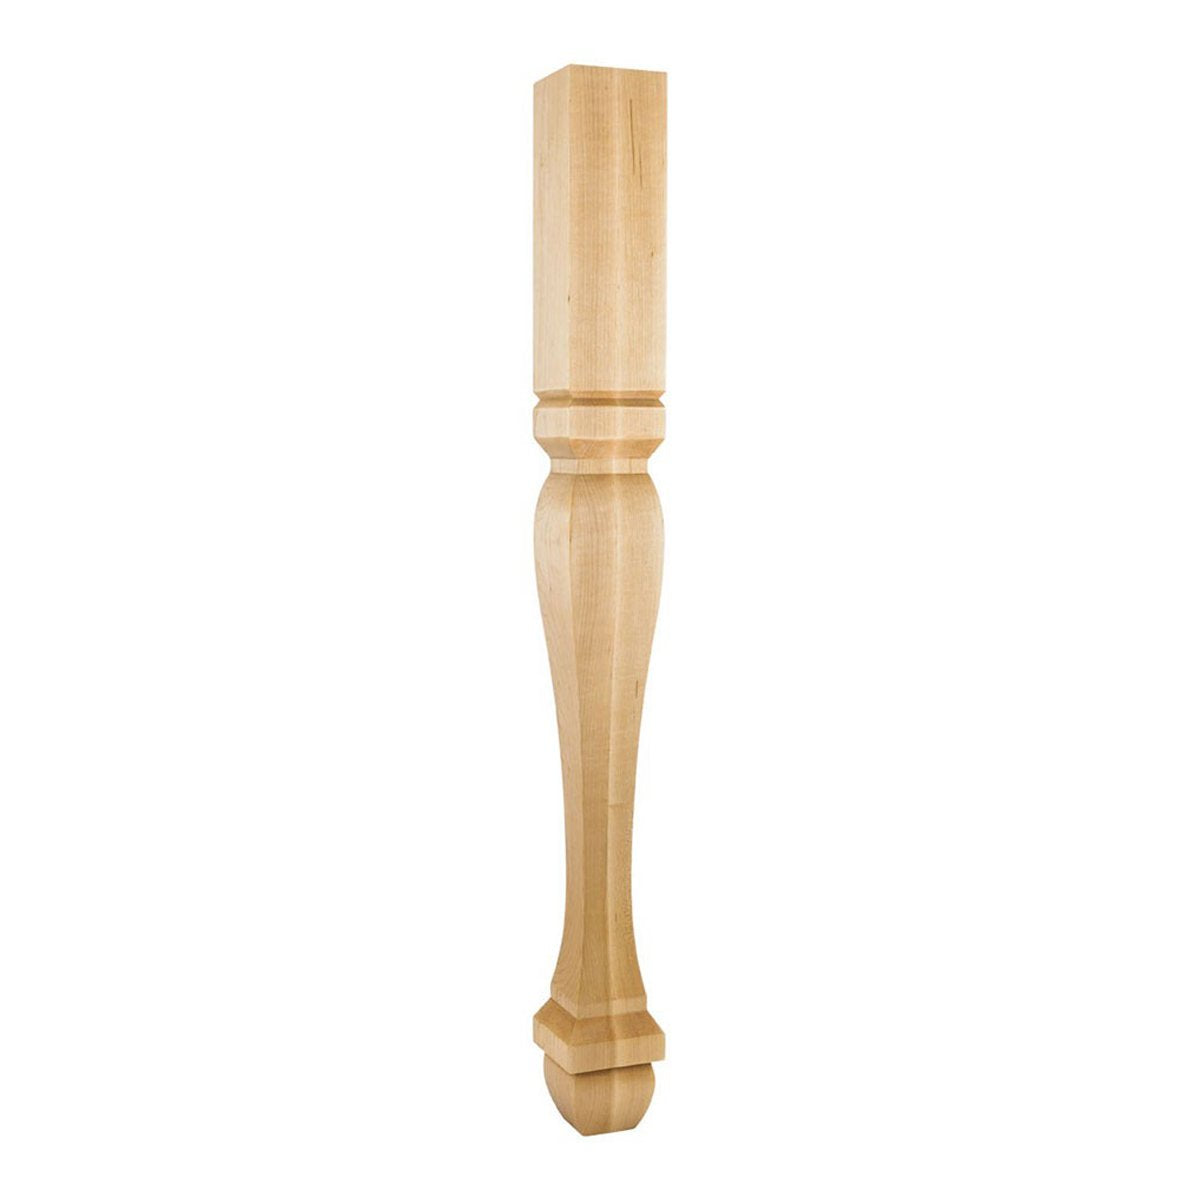 Hardware Resources 3-1/2" x 3-1/2" x 35-1/2" Square Hard Maple Post / Table Leg with Foot-DirectSinks